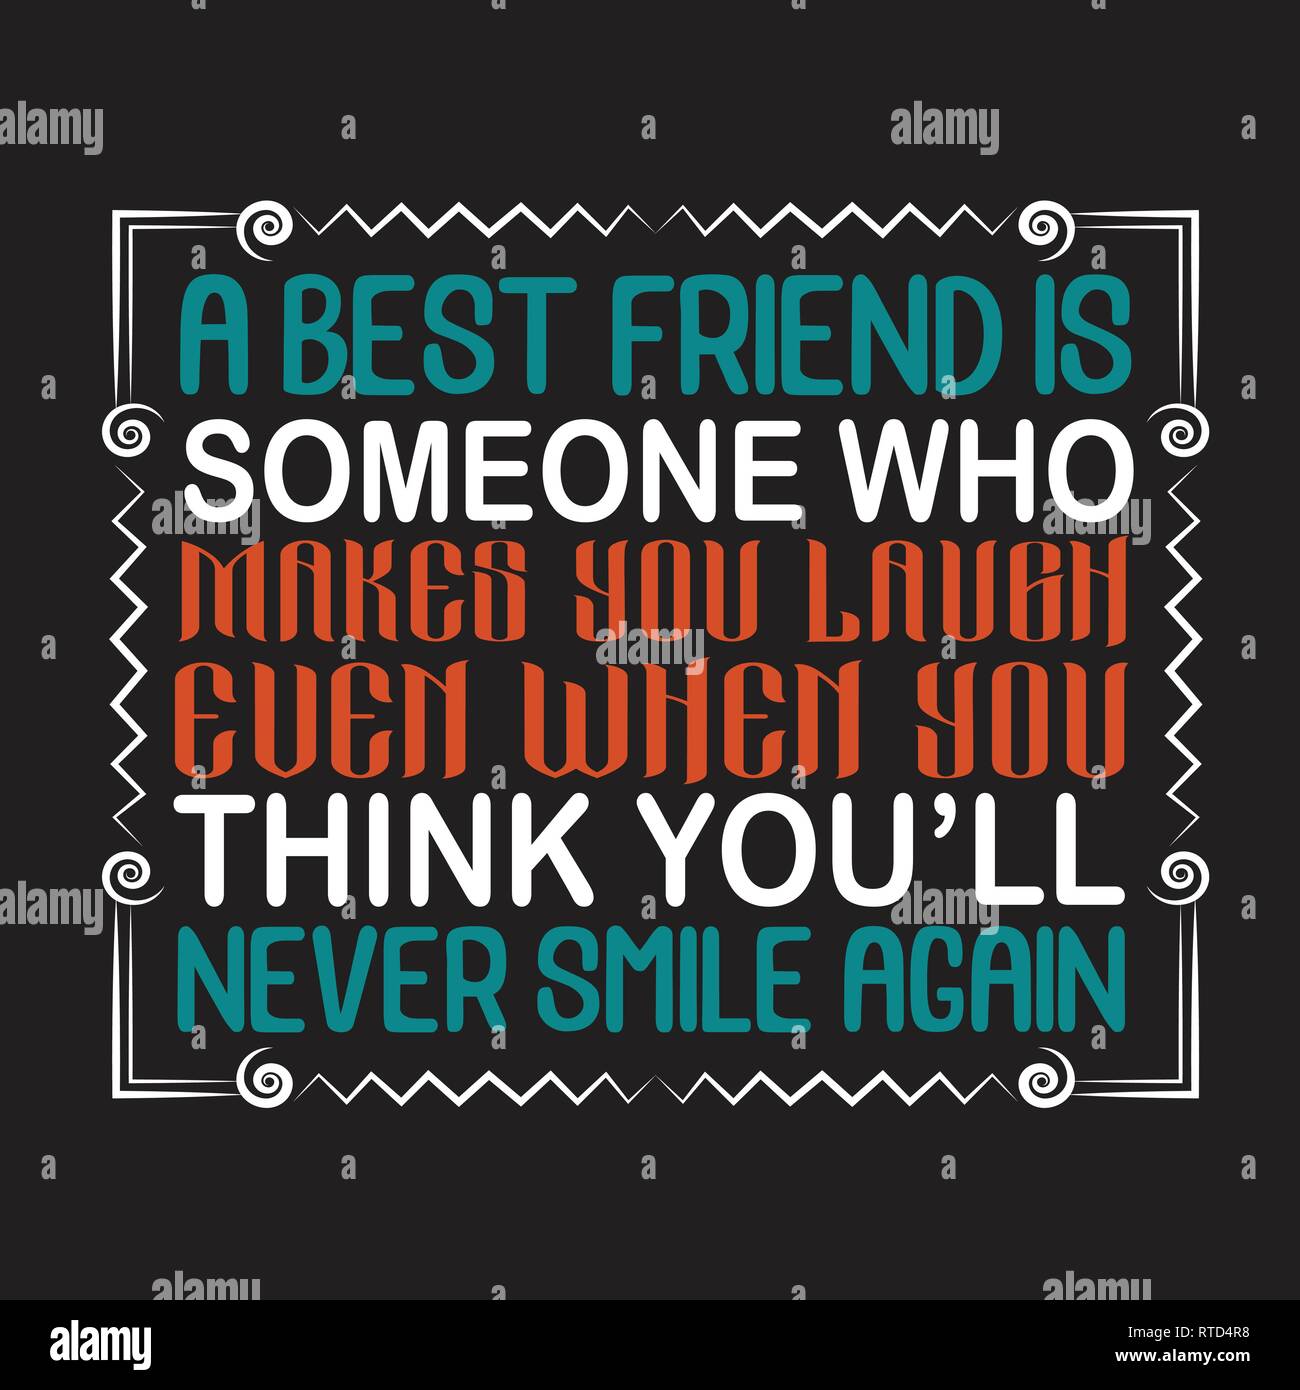 laughing friends quotes